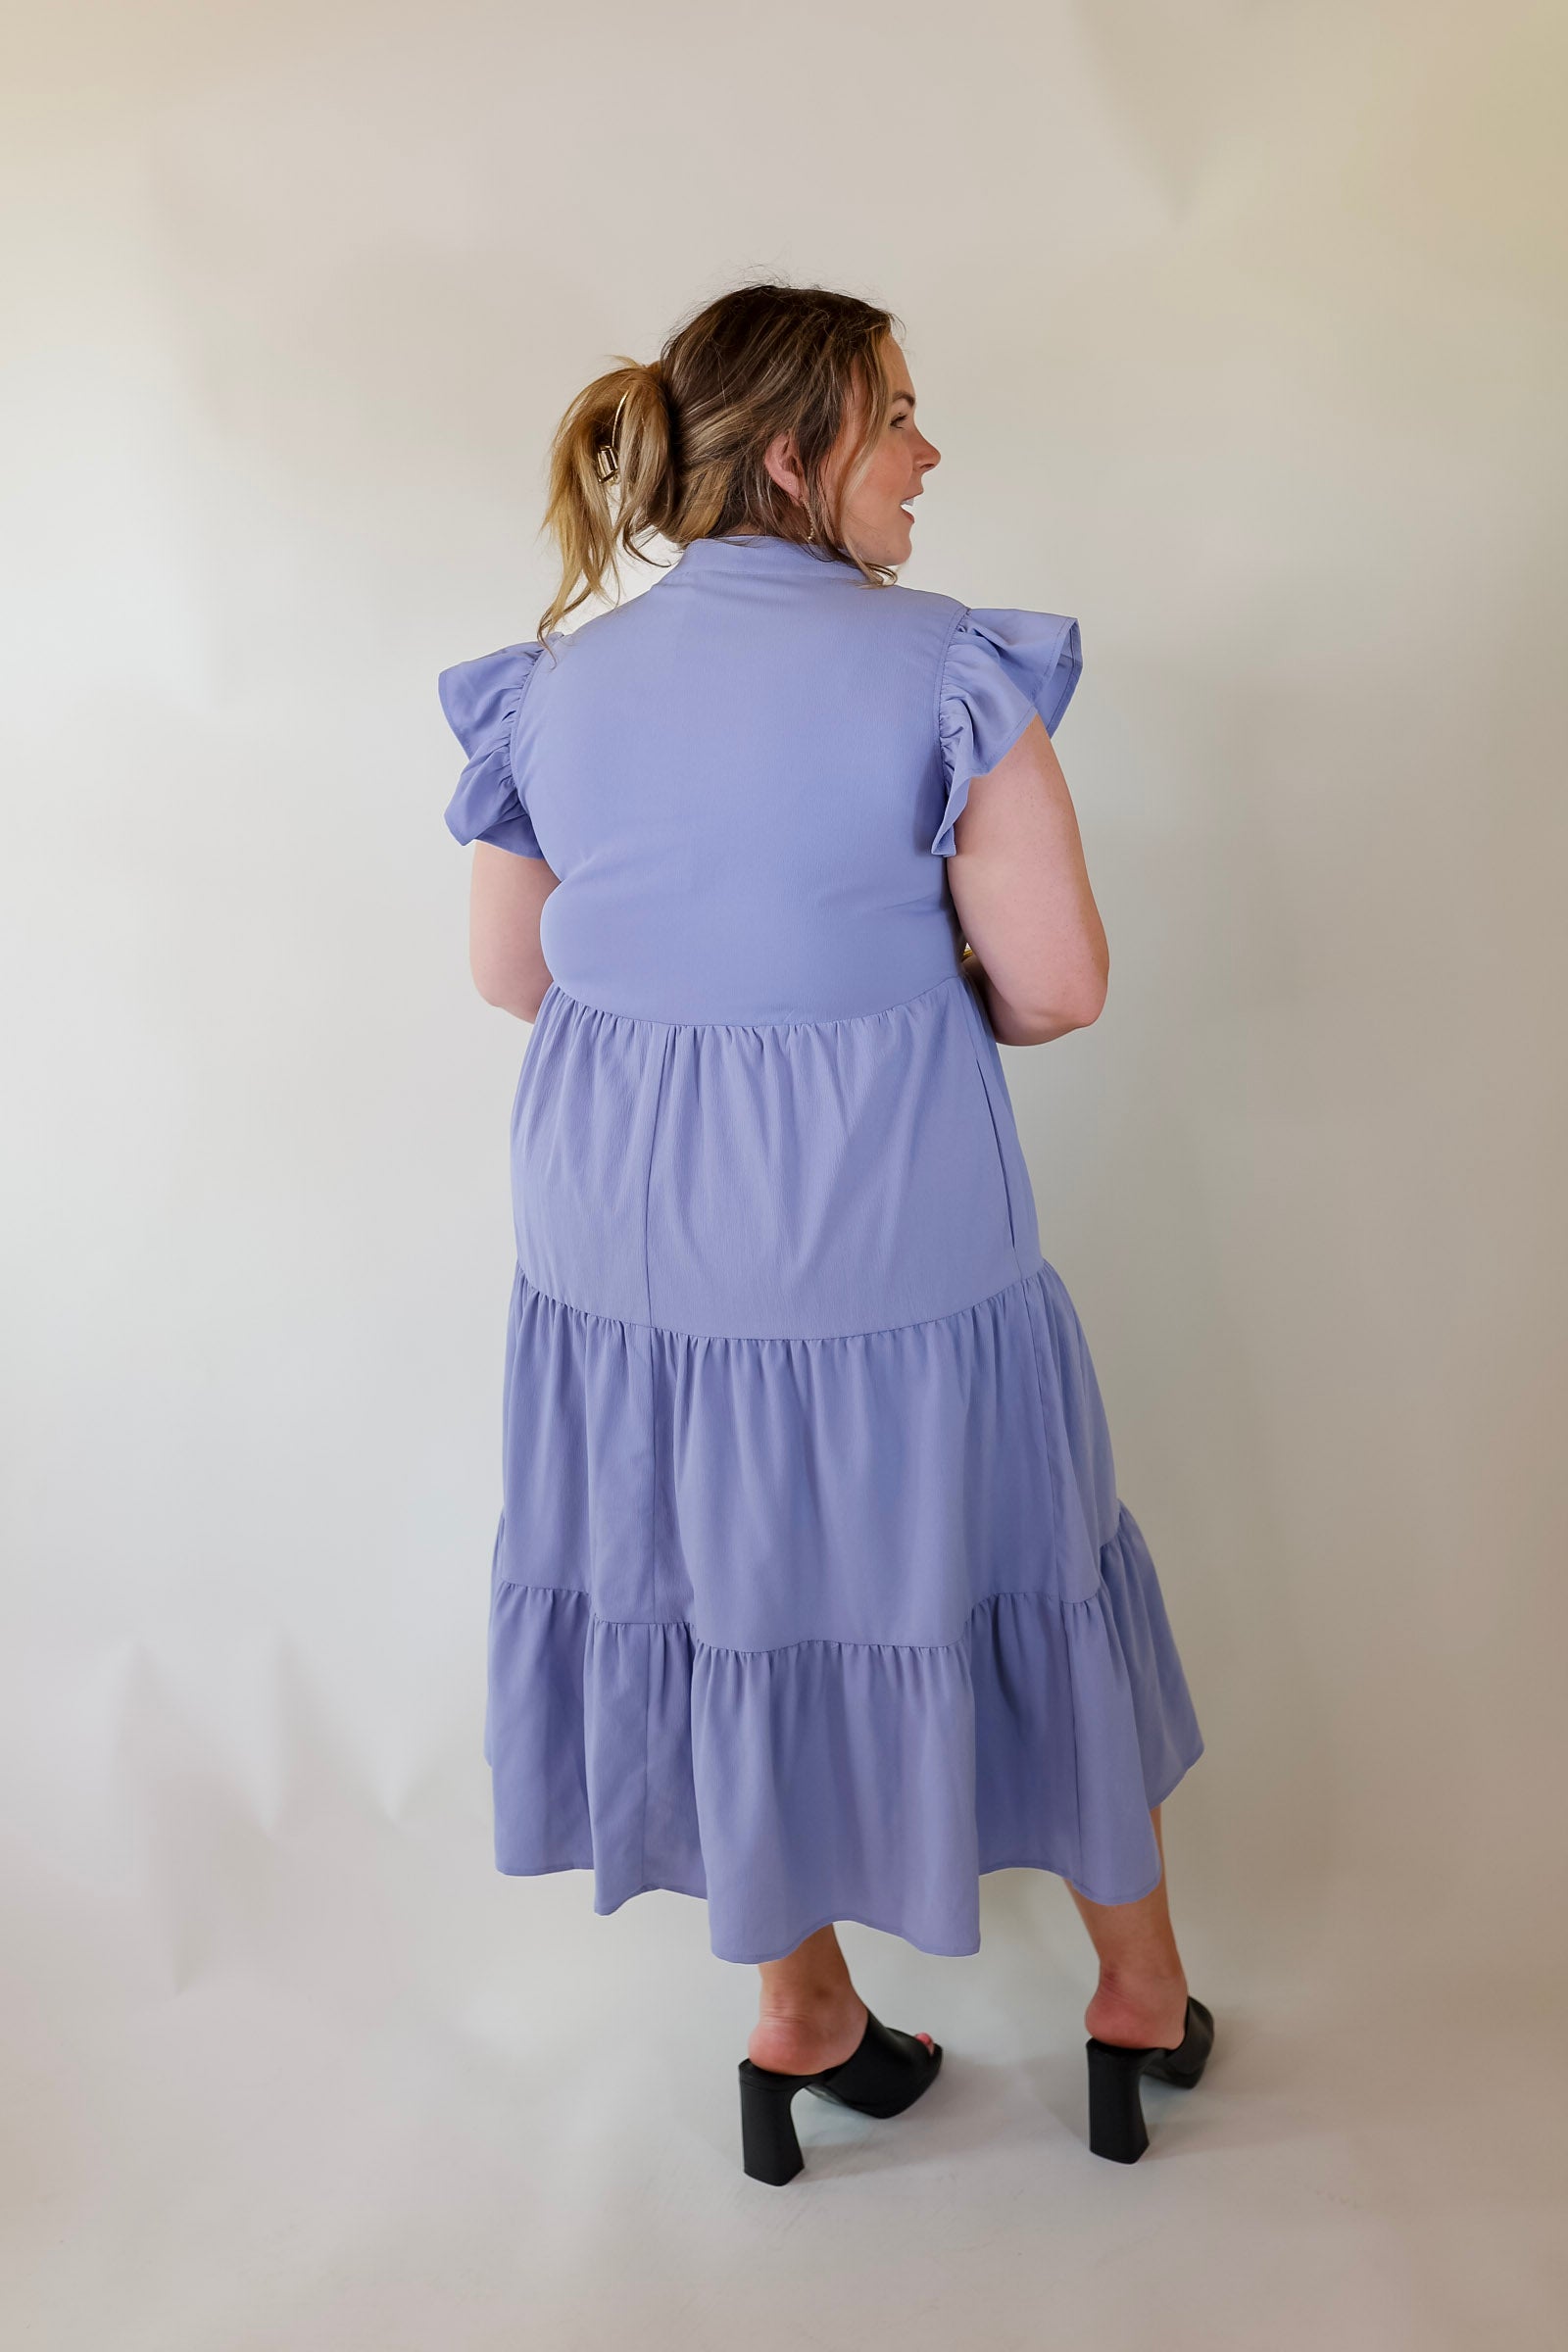 Magnolia Morning Ruffle Cap Sleeve Tiered Midi Dress in Periwinkle Blue - Giddy Up Glamour Boutique